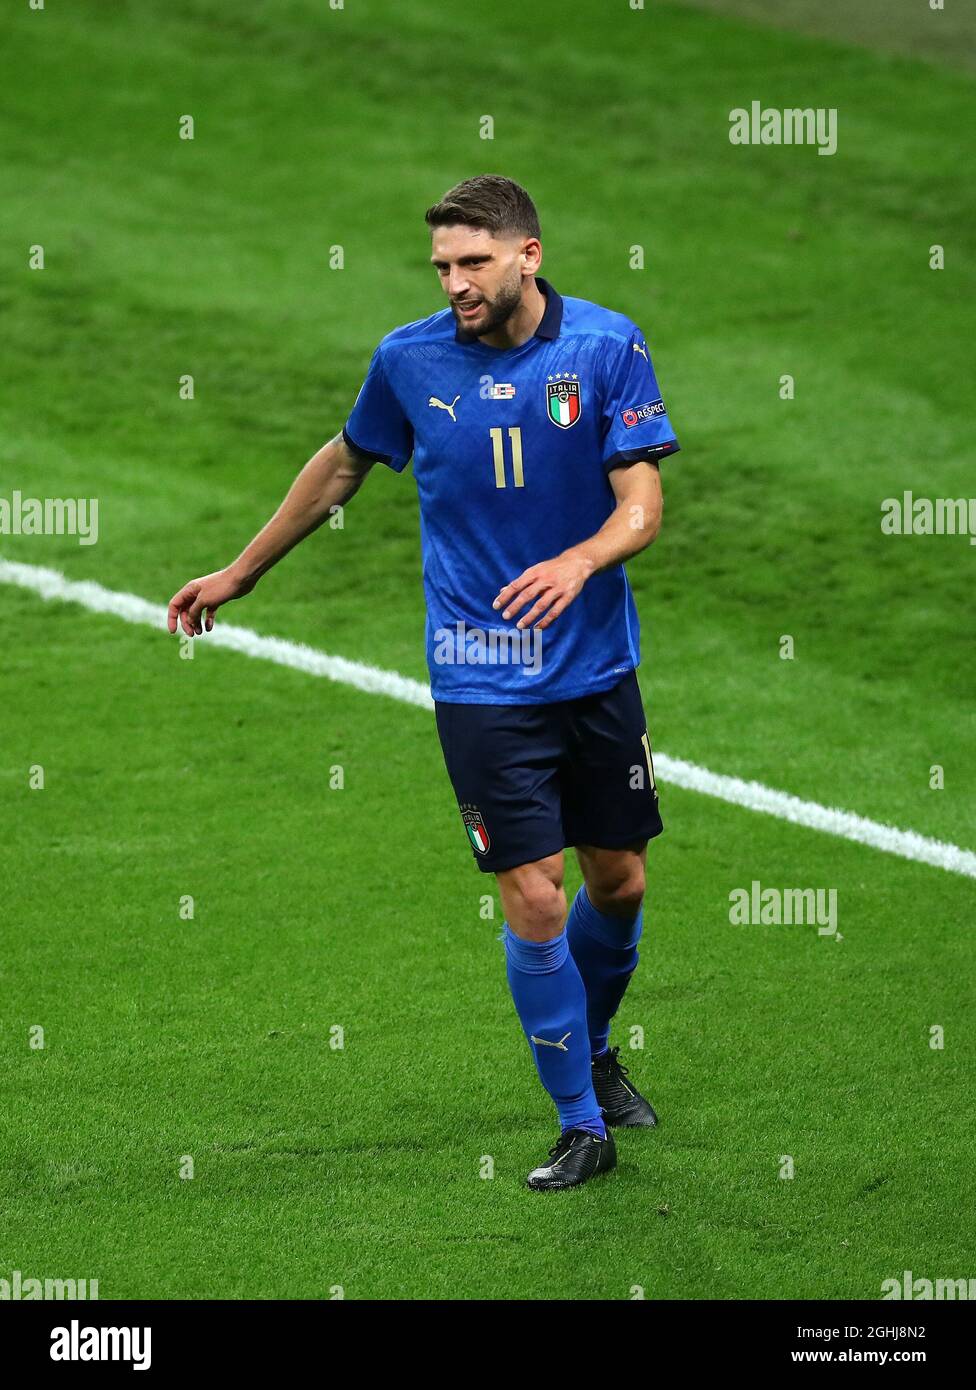 London, England, 26th June 2021. Domenico Berardi of Italy during the UEFA European Championships match at Wembley Stadium, London. Picture credit should read: David Klein / Sportimage via PA Images Stock Photo